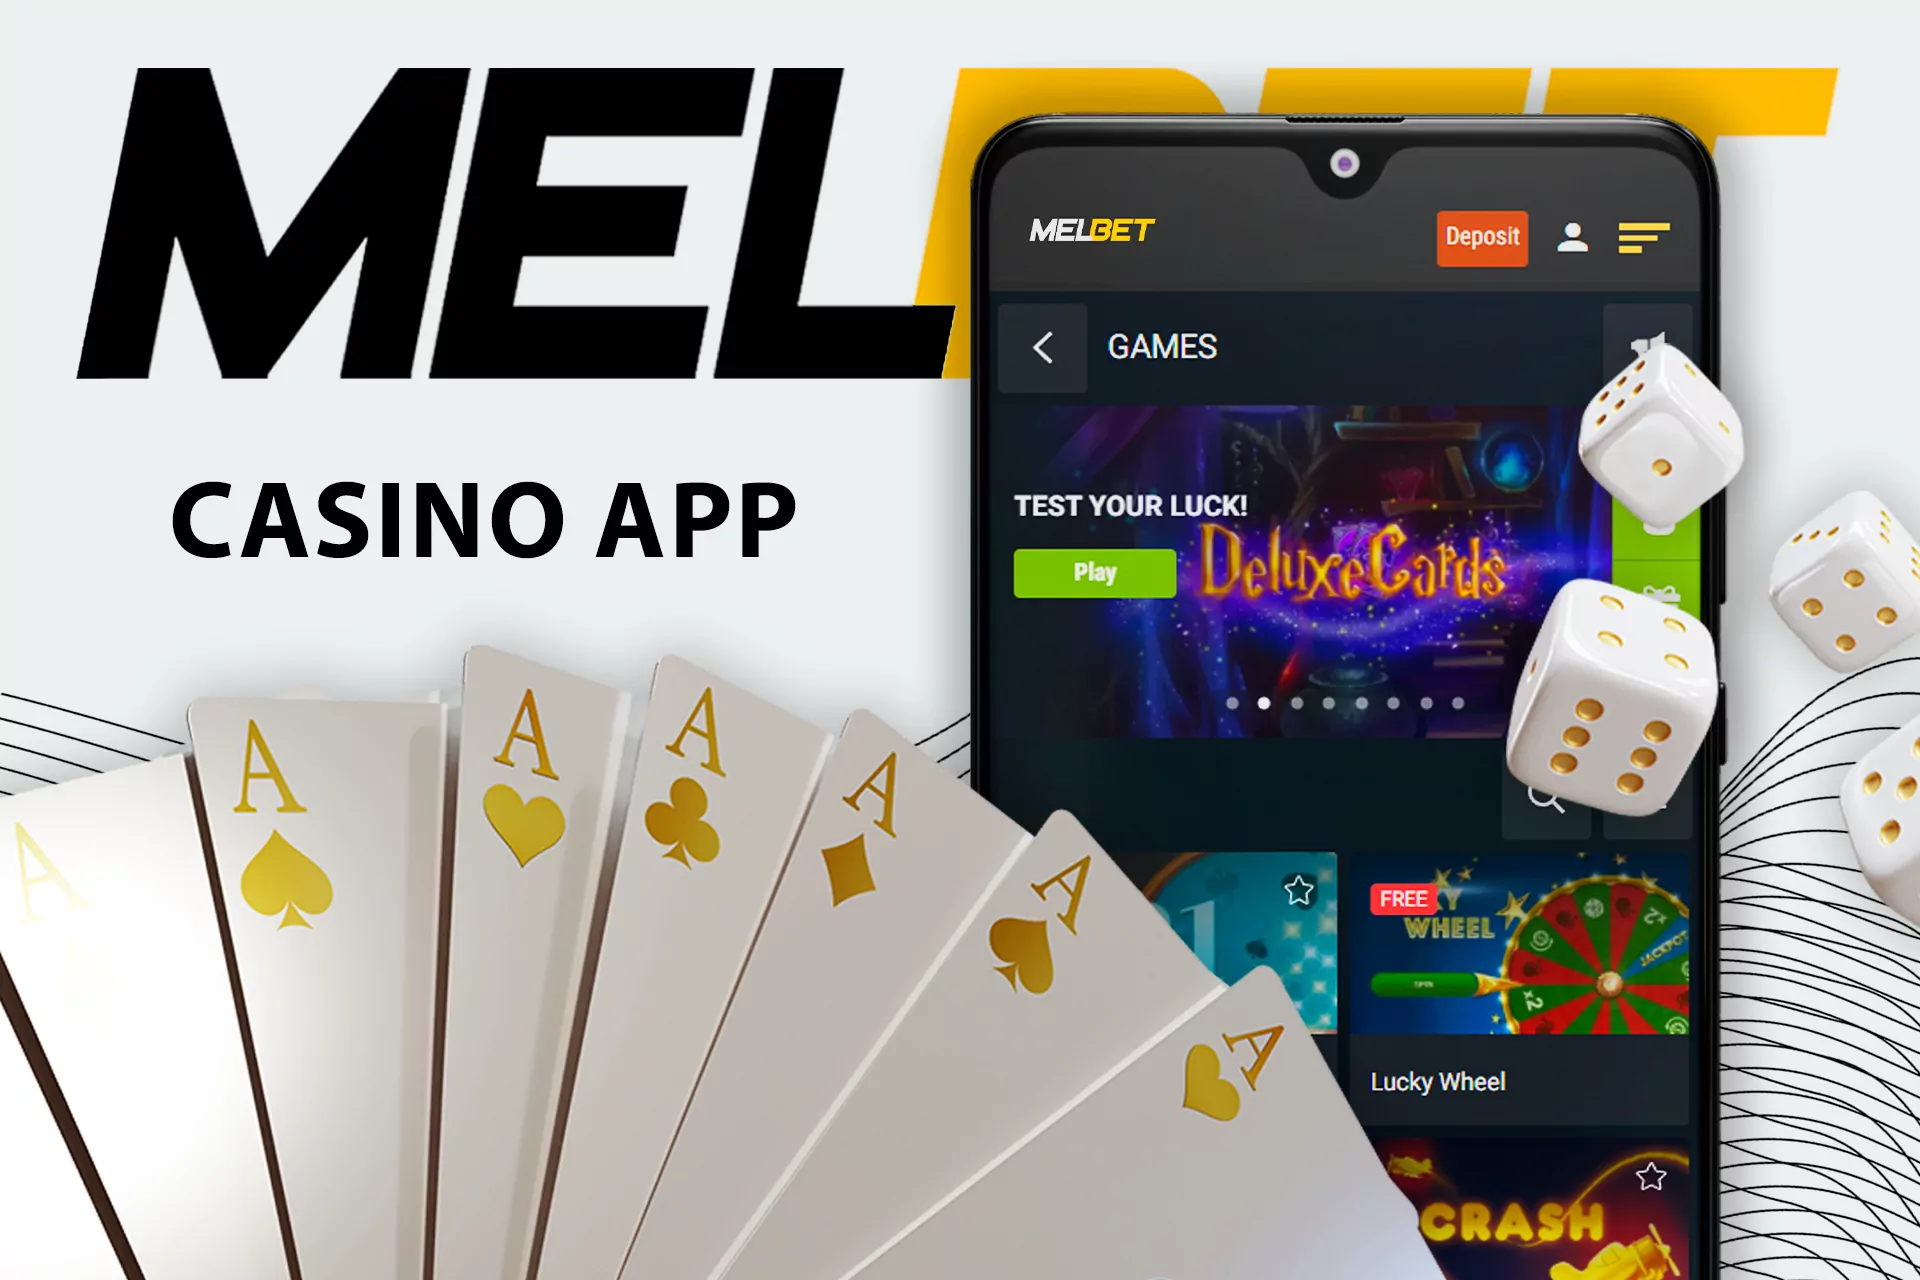 Use the Melbet app to play casino games in Bangladesh.